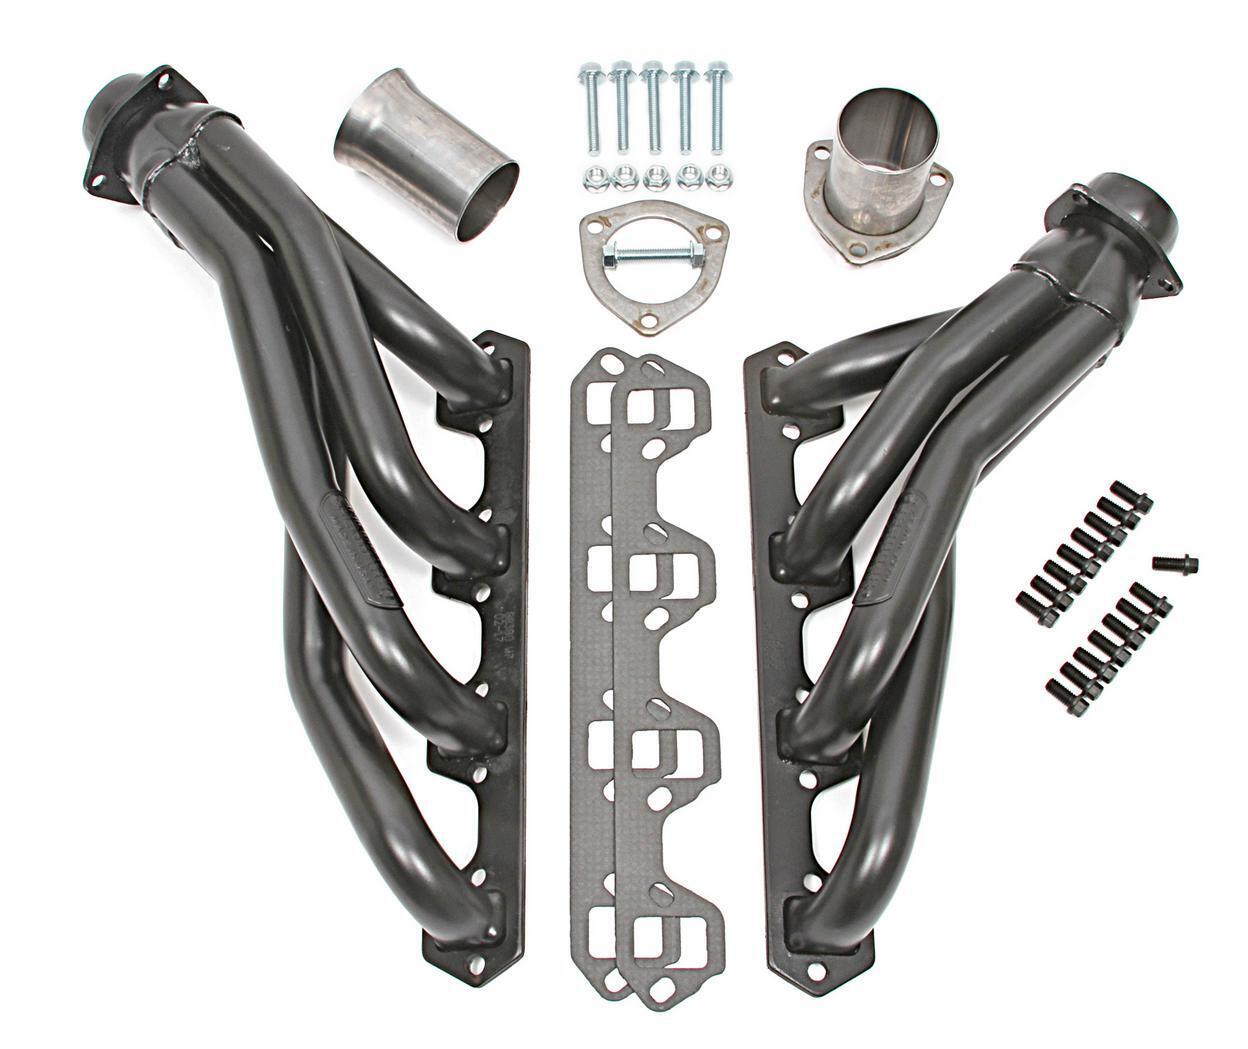 Hedman Hedders 88380 19Fits 79-93 Ford Fox-Body with 302W Headers; 1-1/2 in. Mid